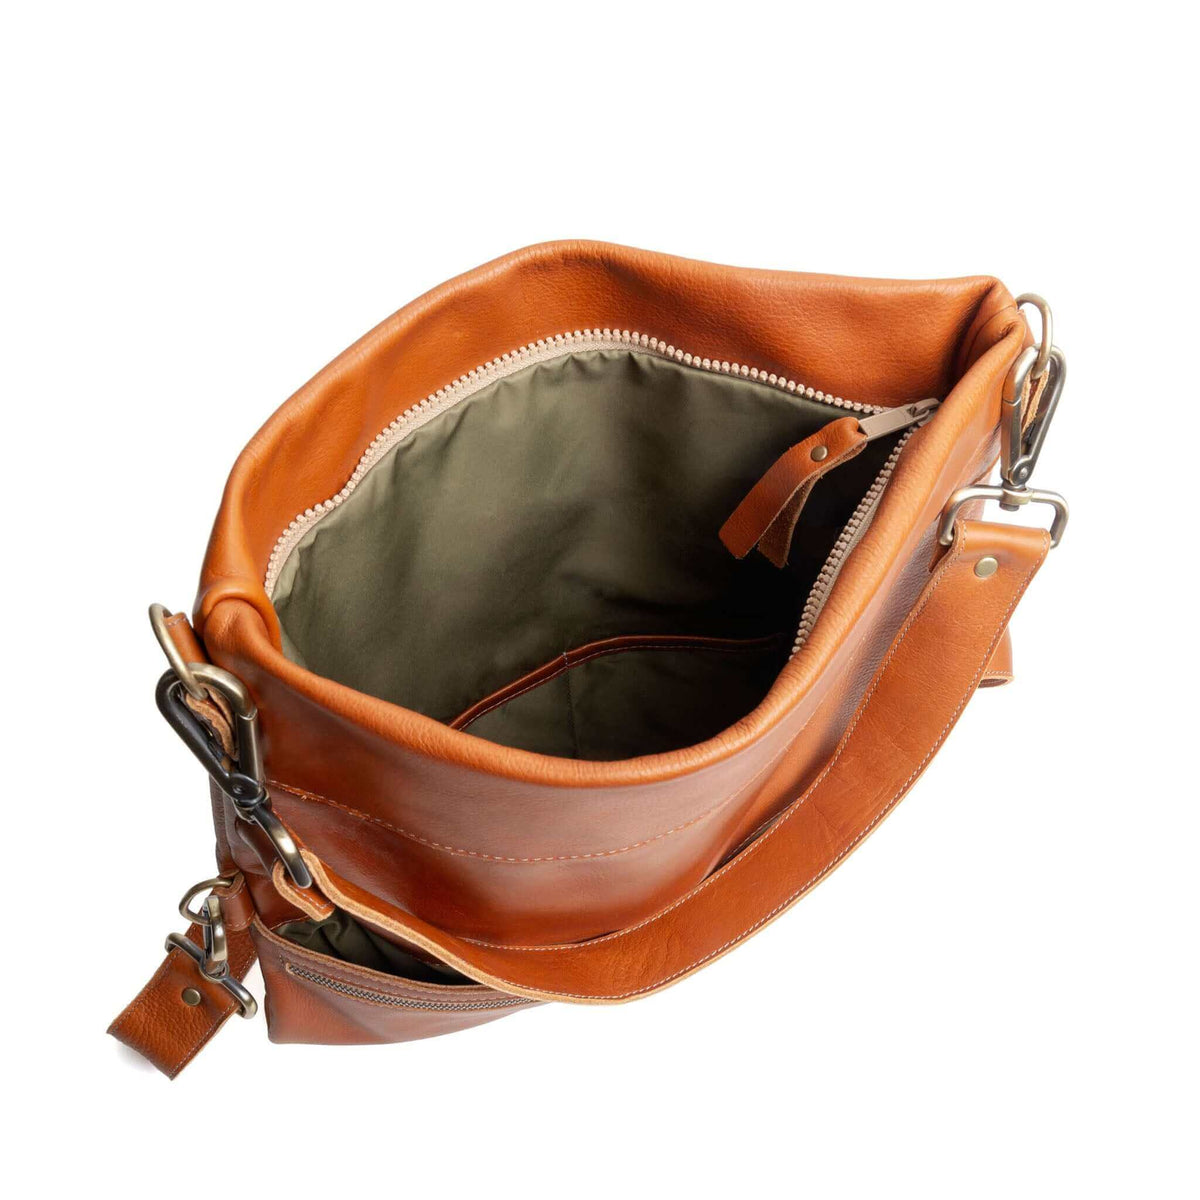 Whiskey pull-up leather, 6-in-1 leather crossbody backpack - Brynn Capella, USA